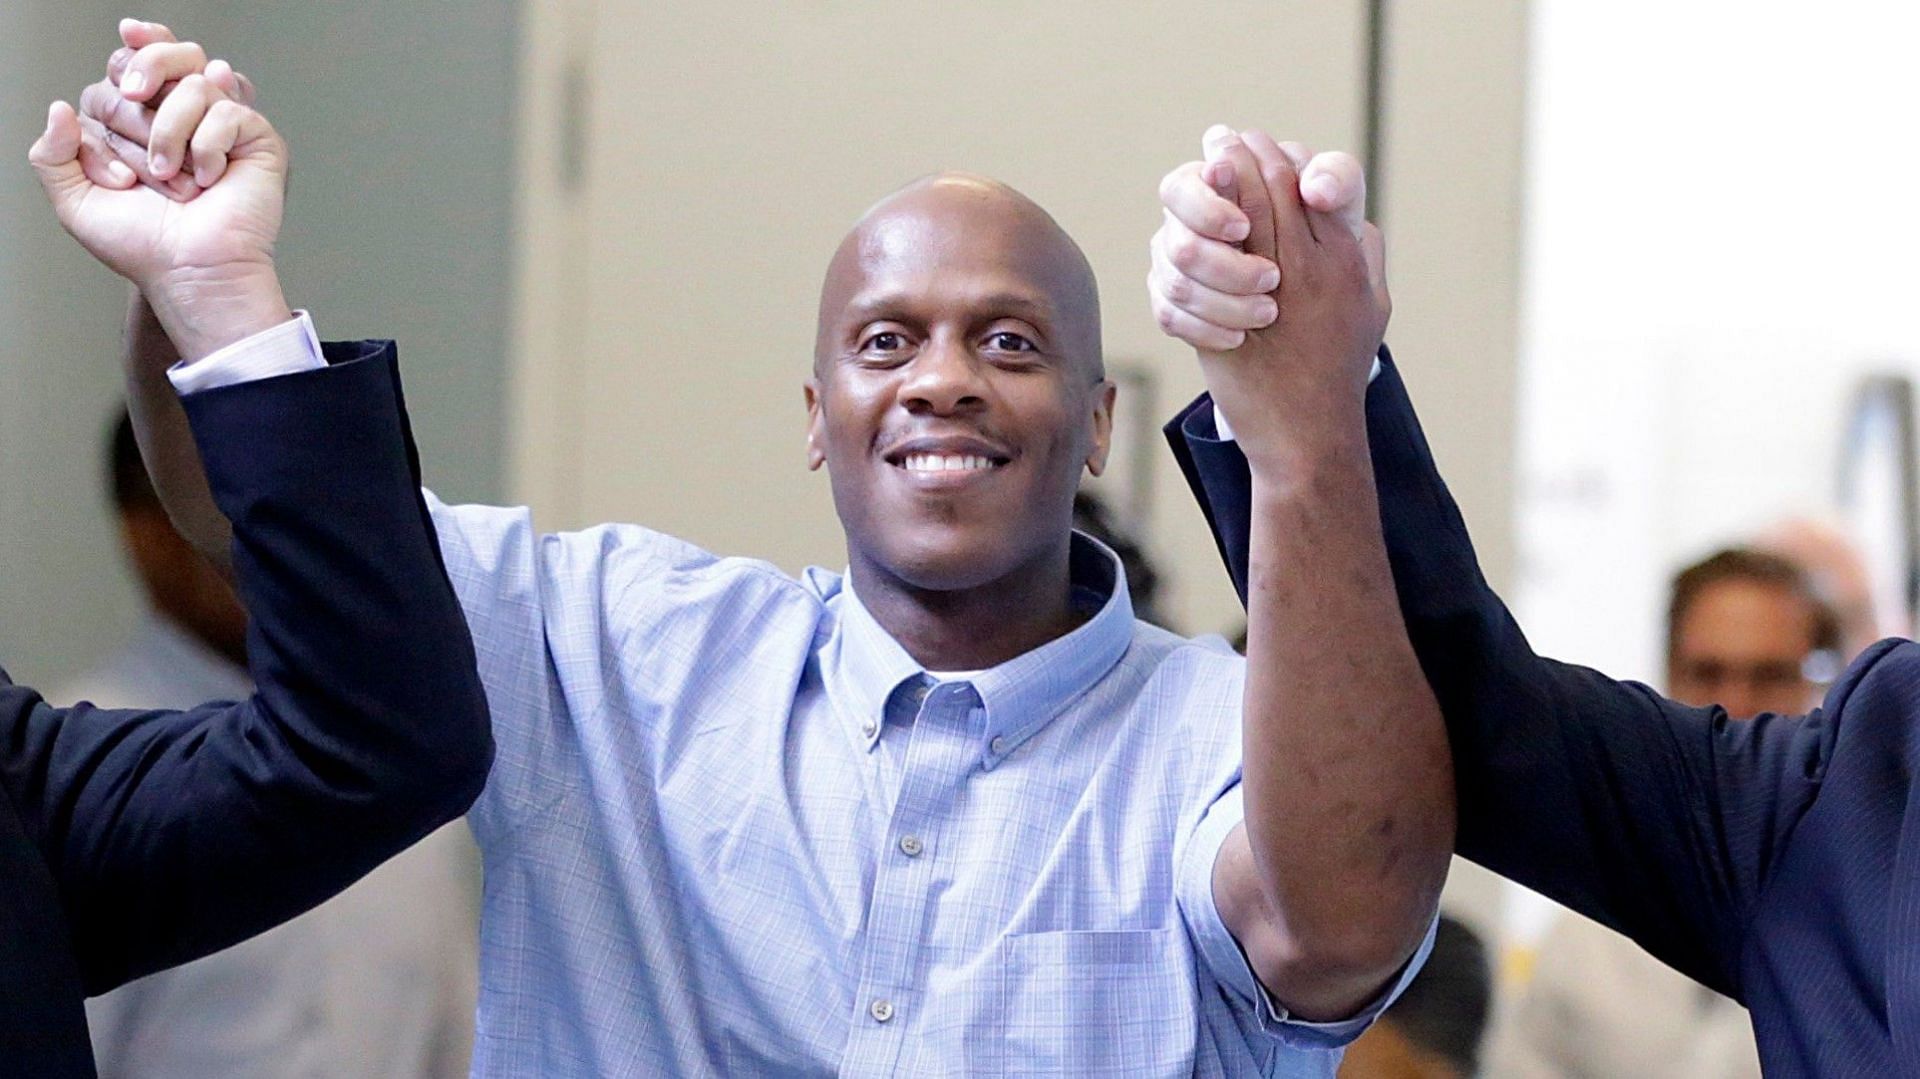 Corey Atchison after his retrial (Image via @mikesimonsphoto/Twitter)